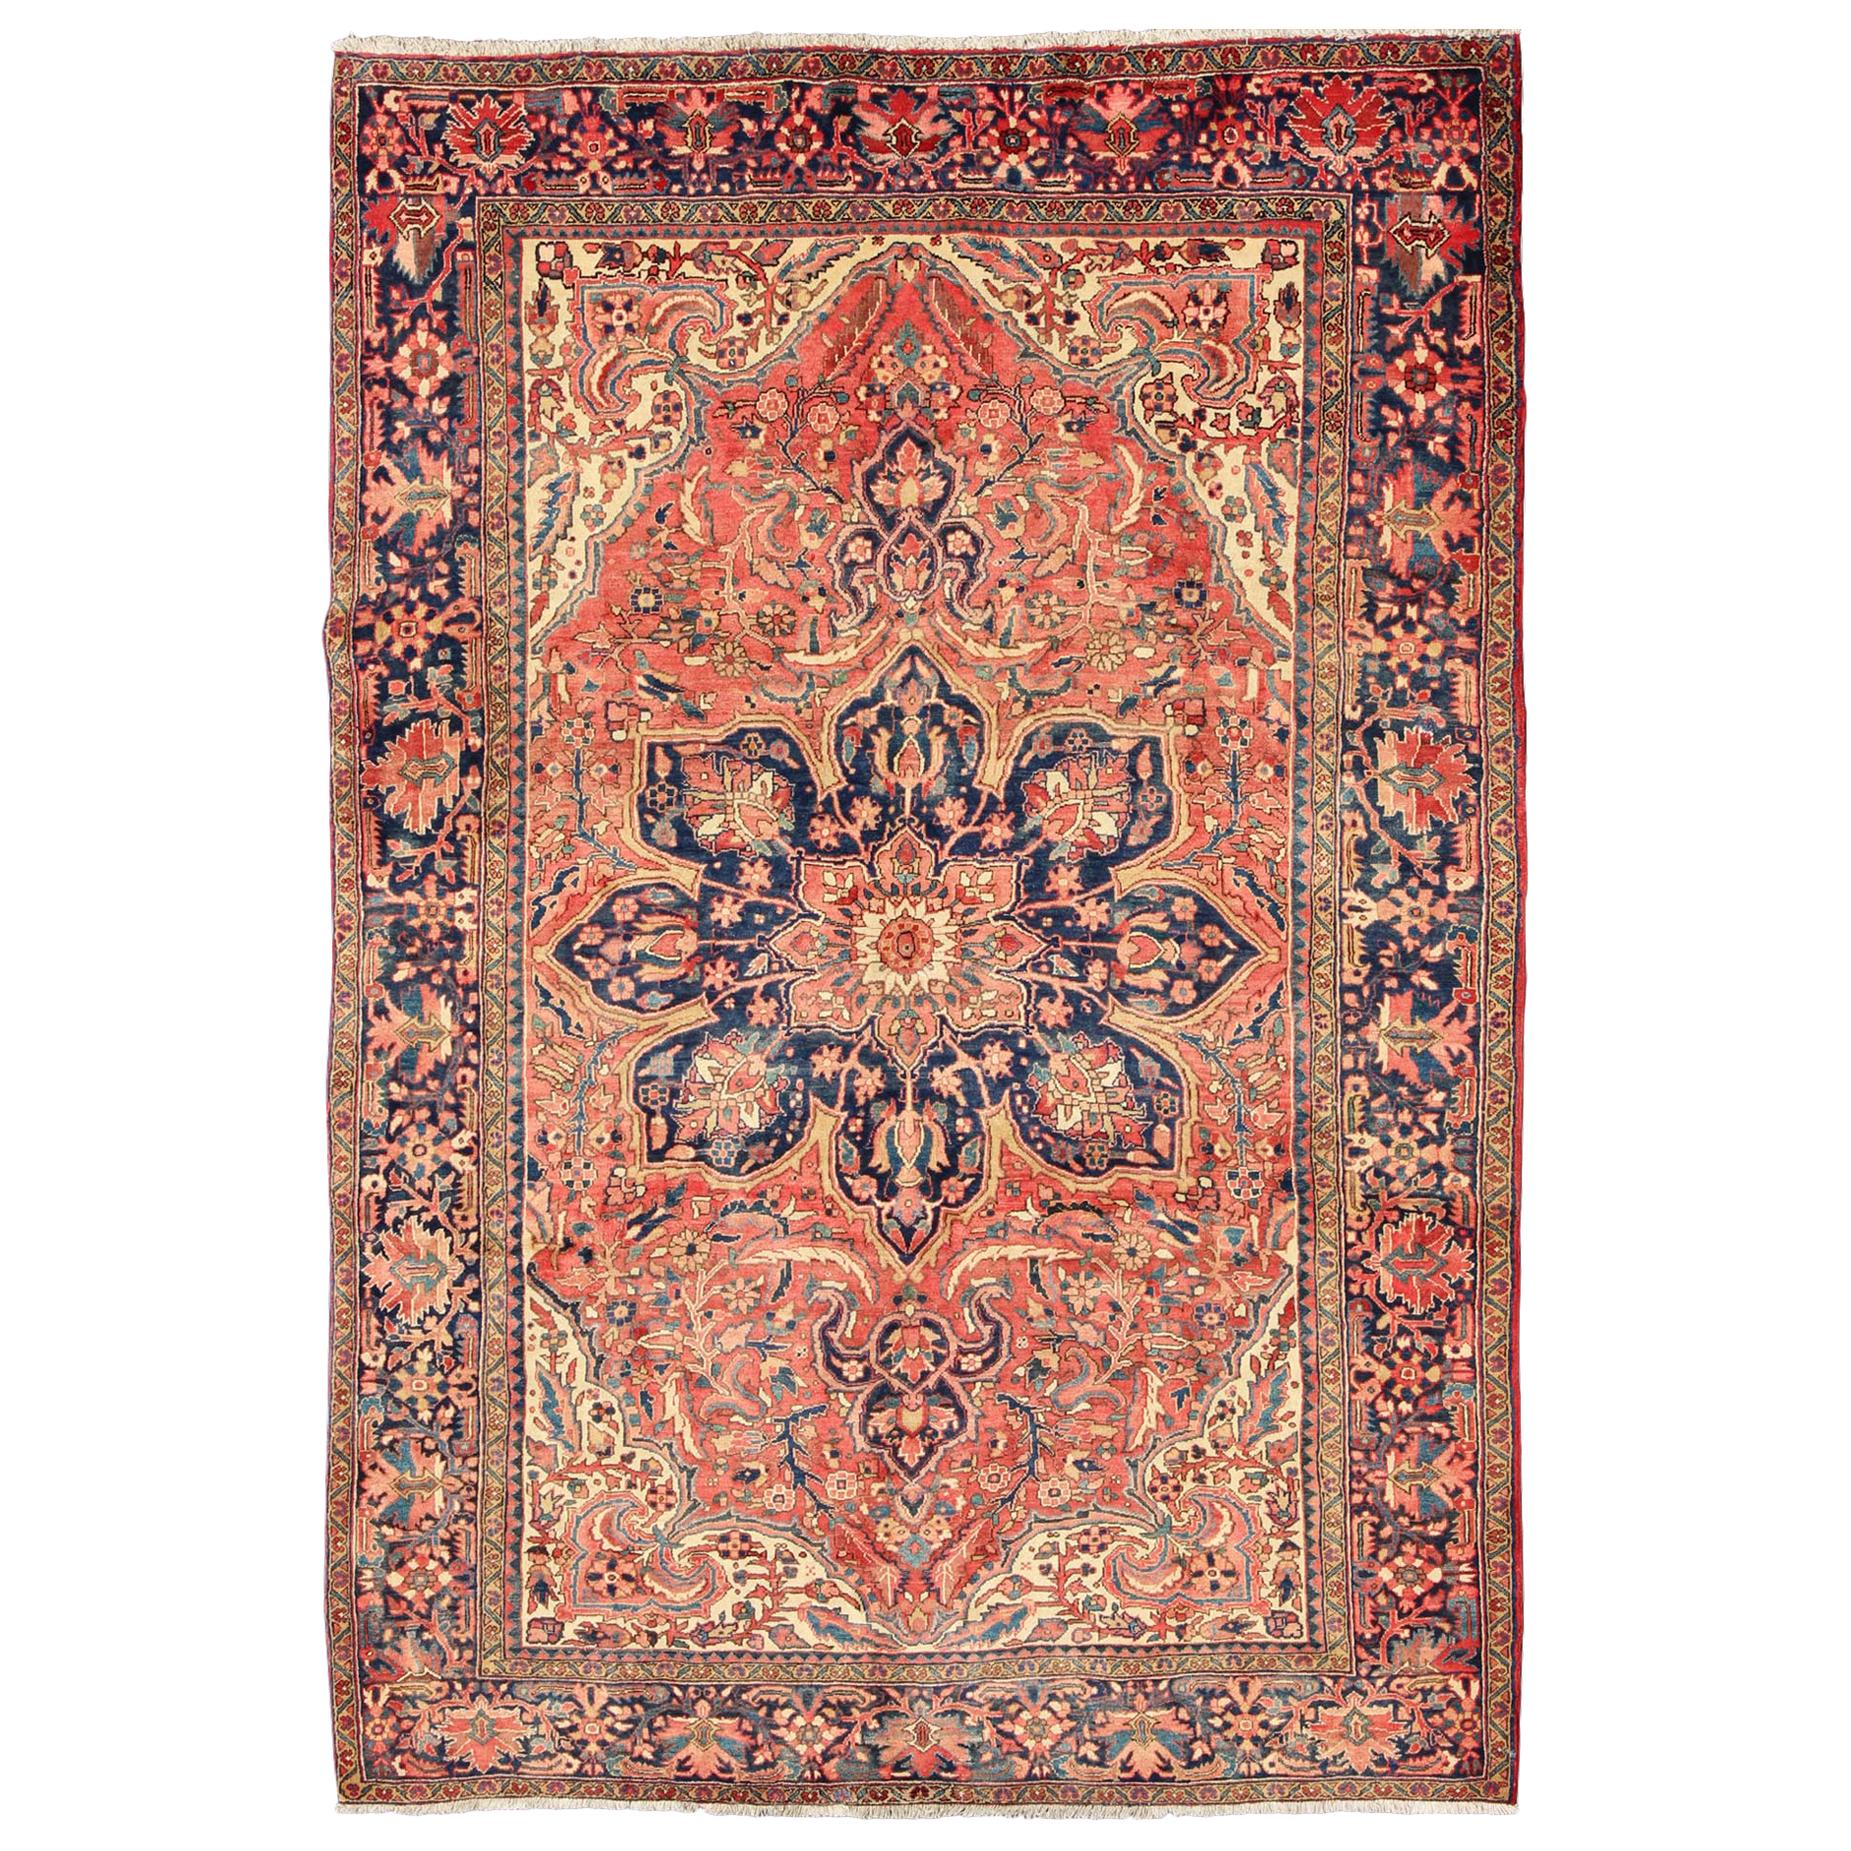 Vintage Persian Heriz Rug with Floral Medallion Design in Red and Blue